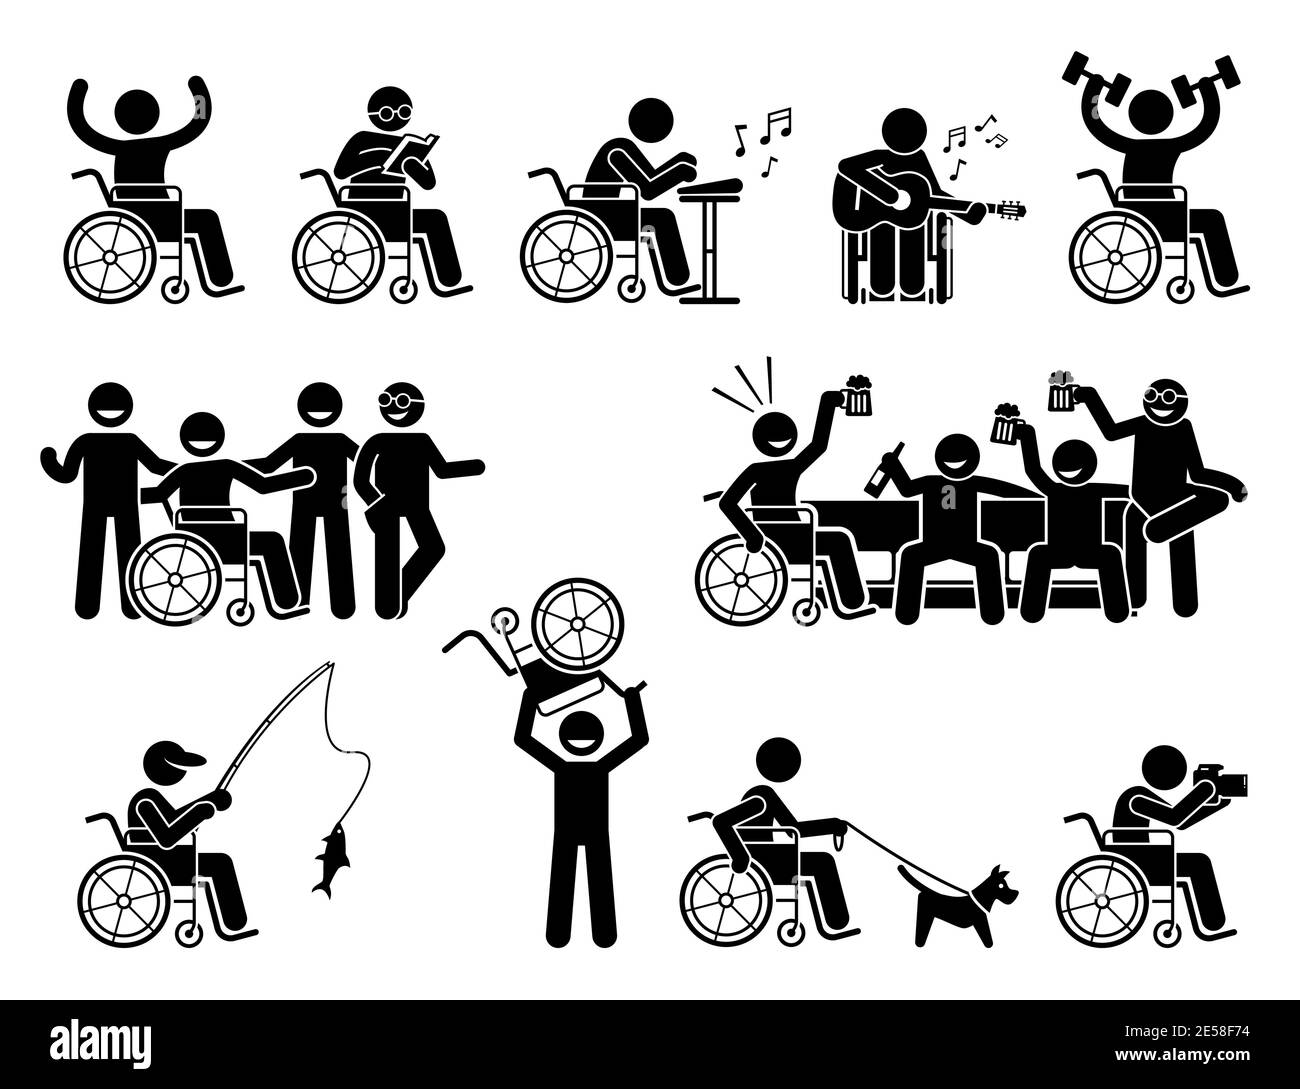 Happy disabled man doing various activities, hobbies, and leading a normal life stick figures icons. Vector illustrations of a person on wheelchair ha Stock Vector